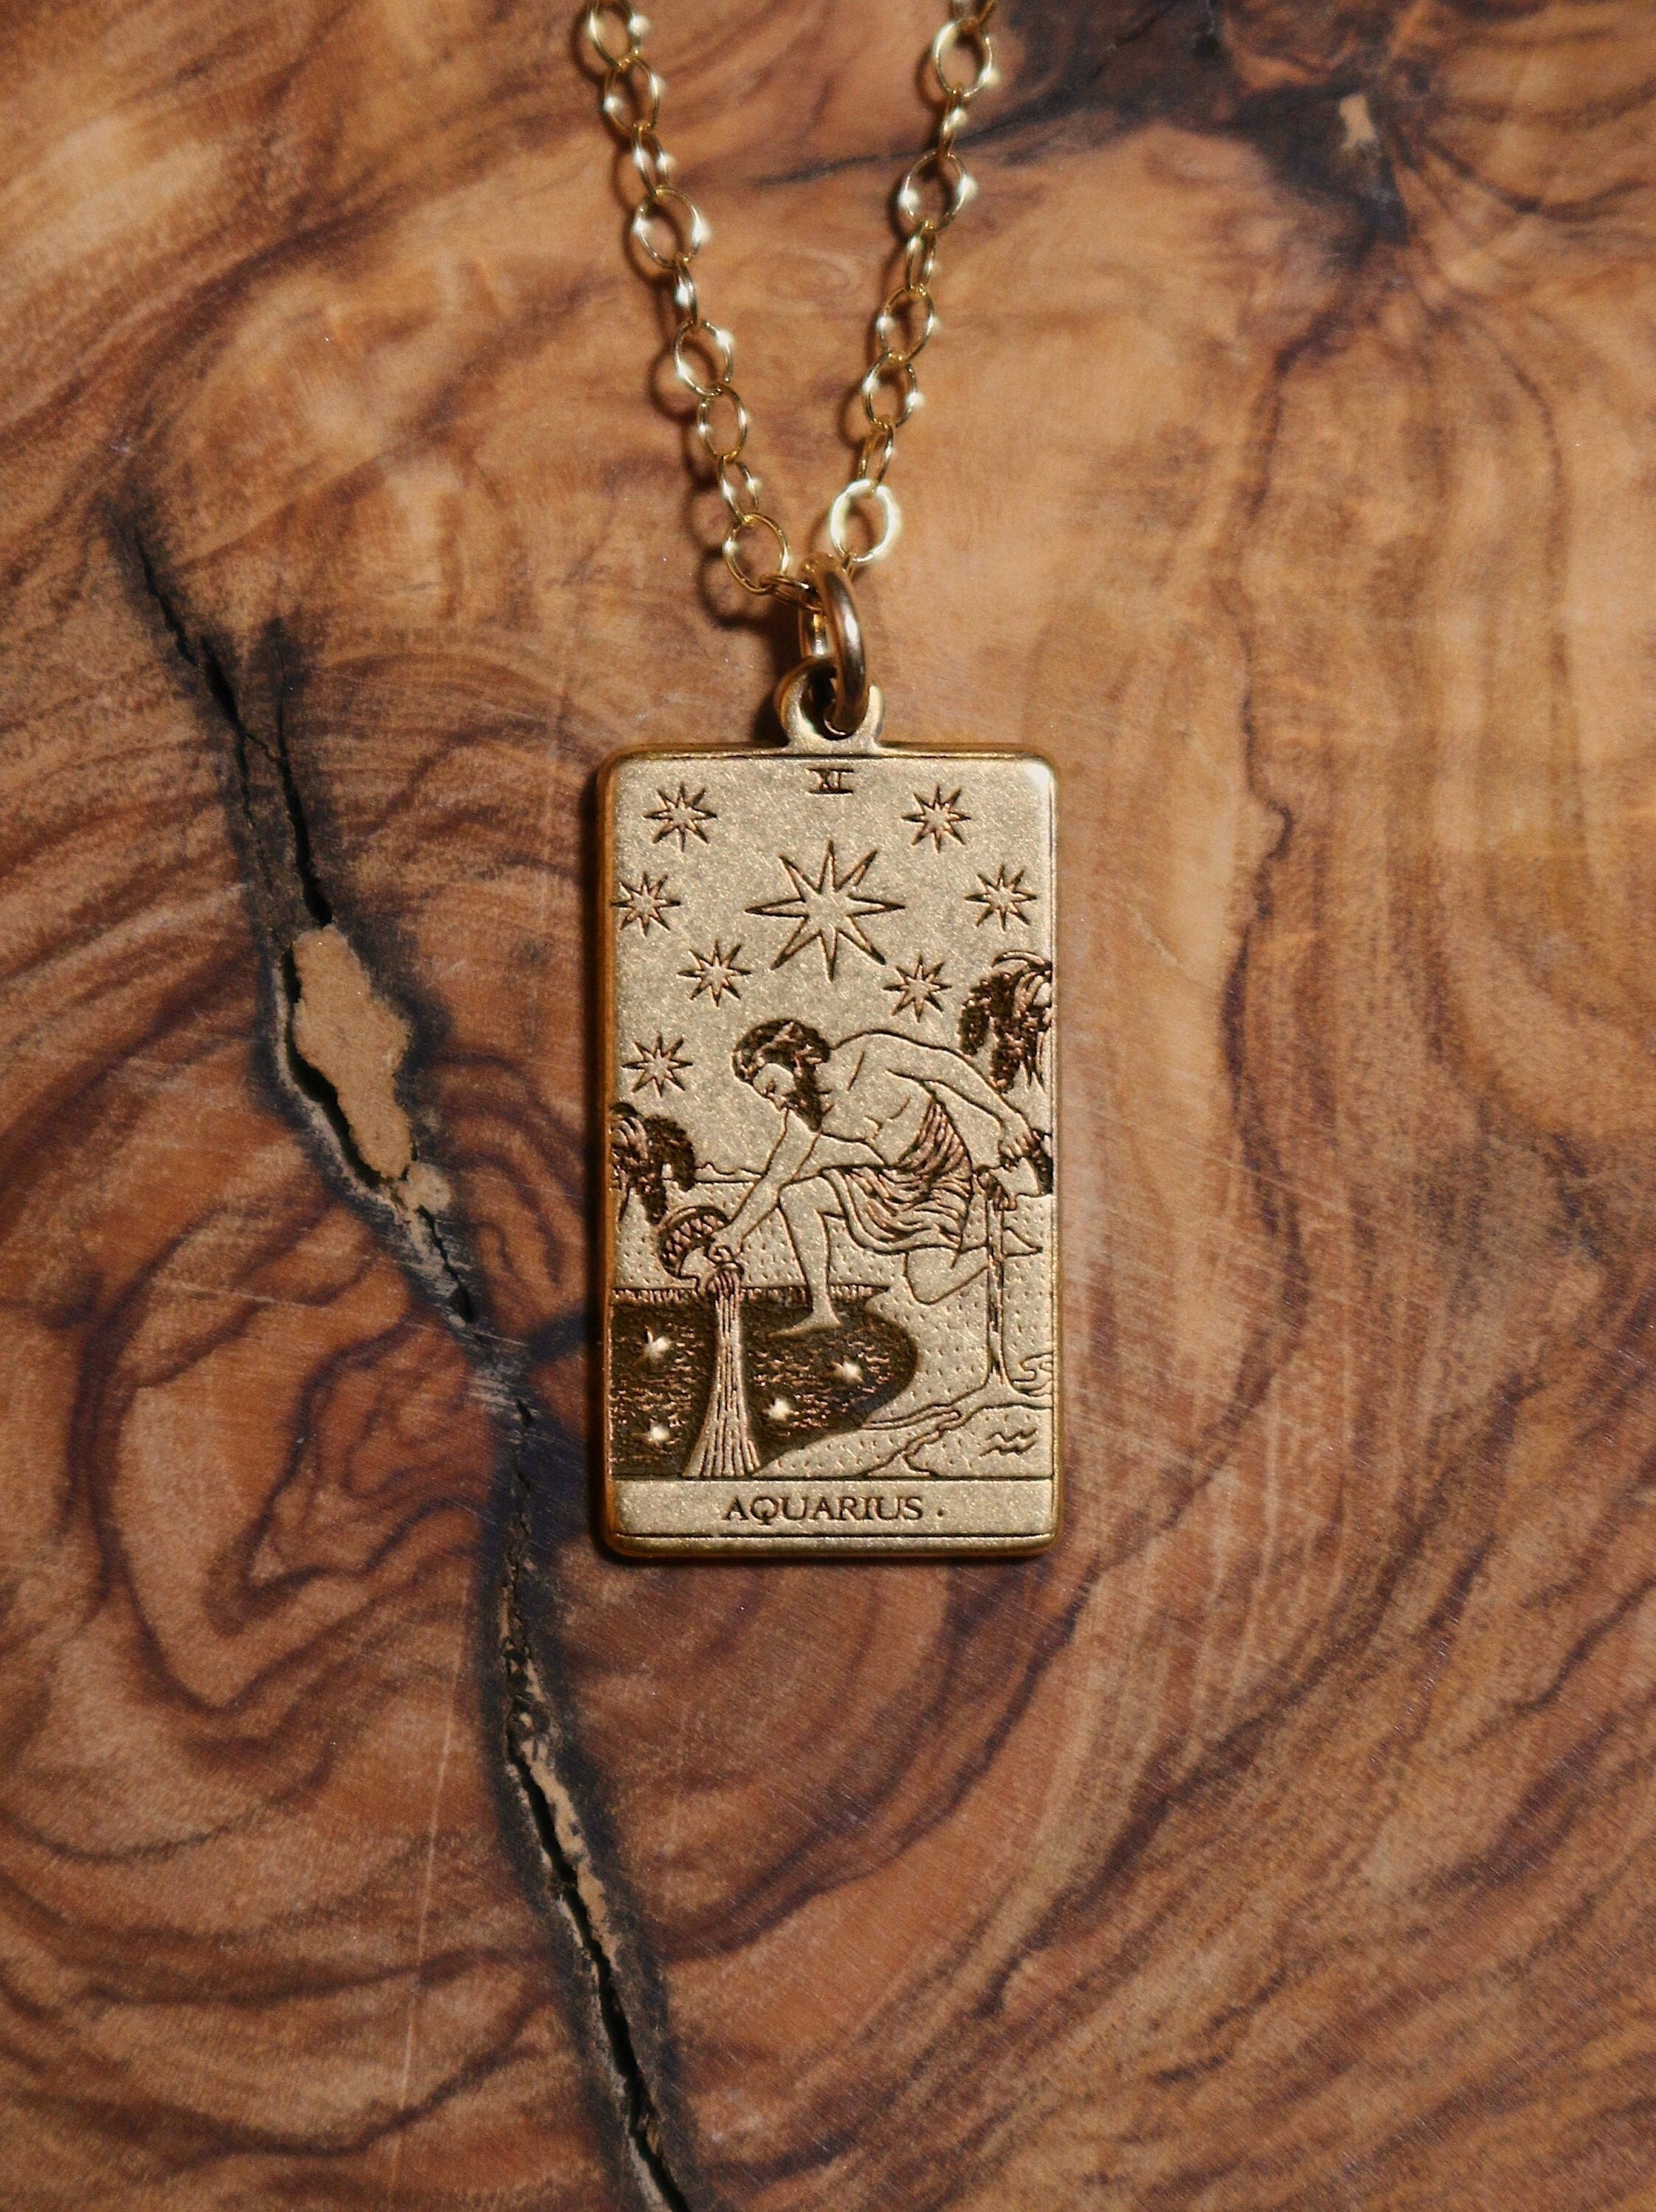 Aquarius The Star Tarot Card Inspired Zodiac Necklace - Gold Filled